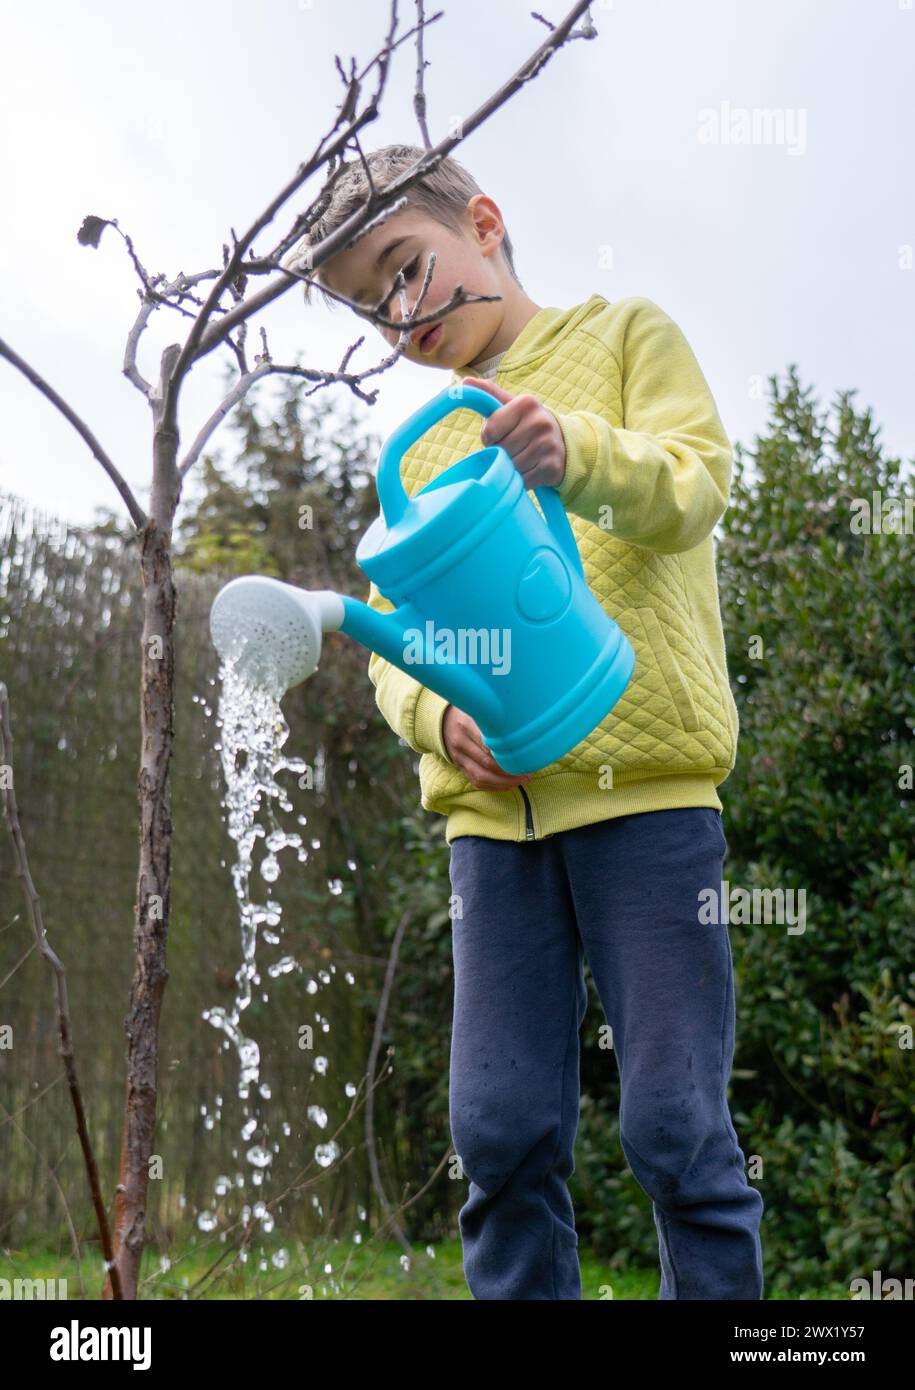 Boy watering a small apple tree with a watering can Stock Photo